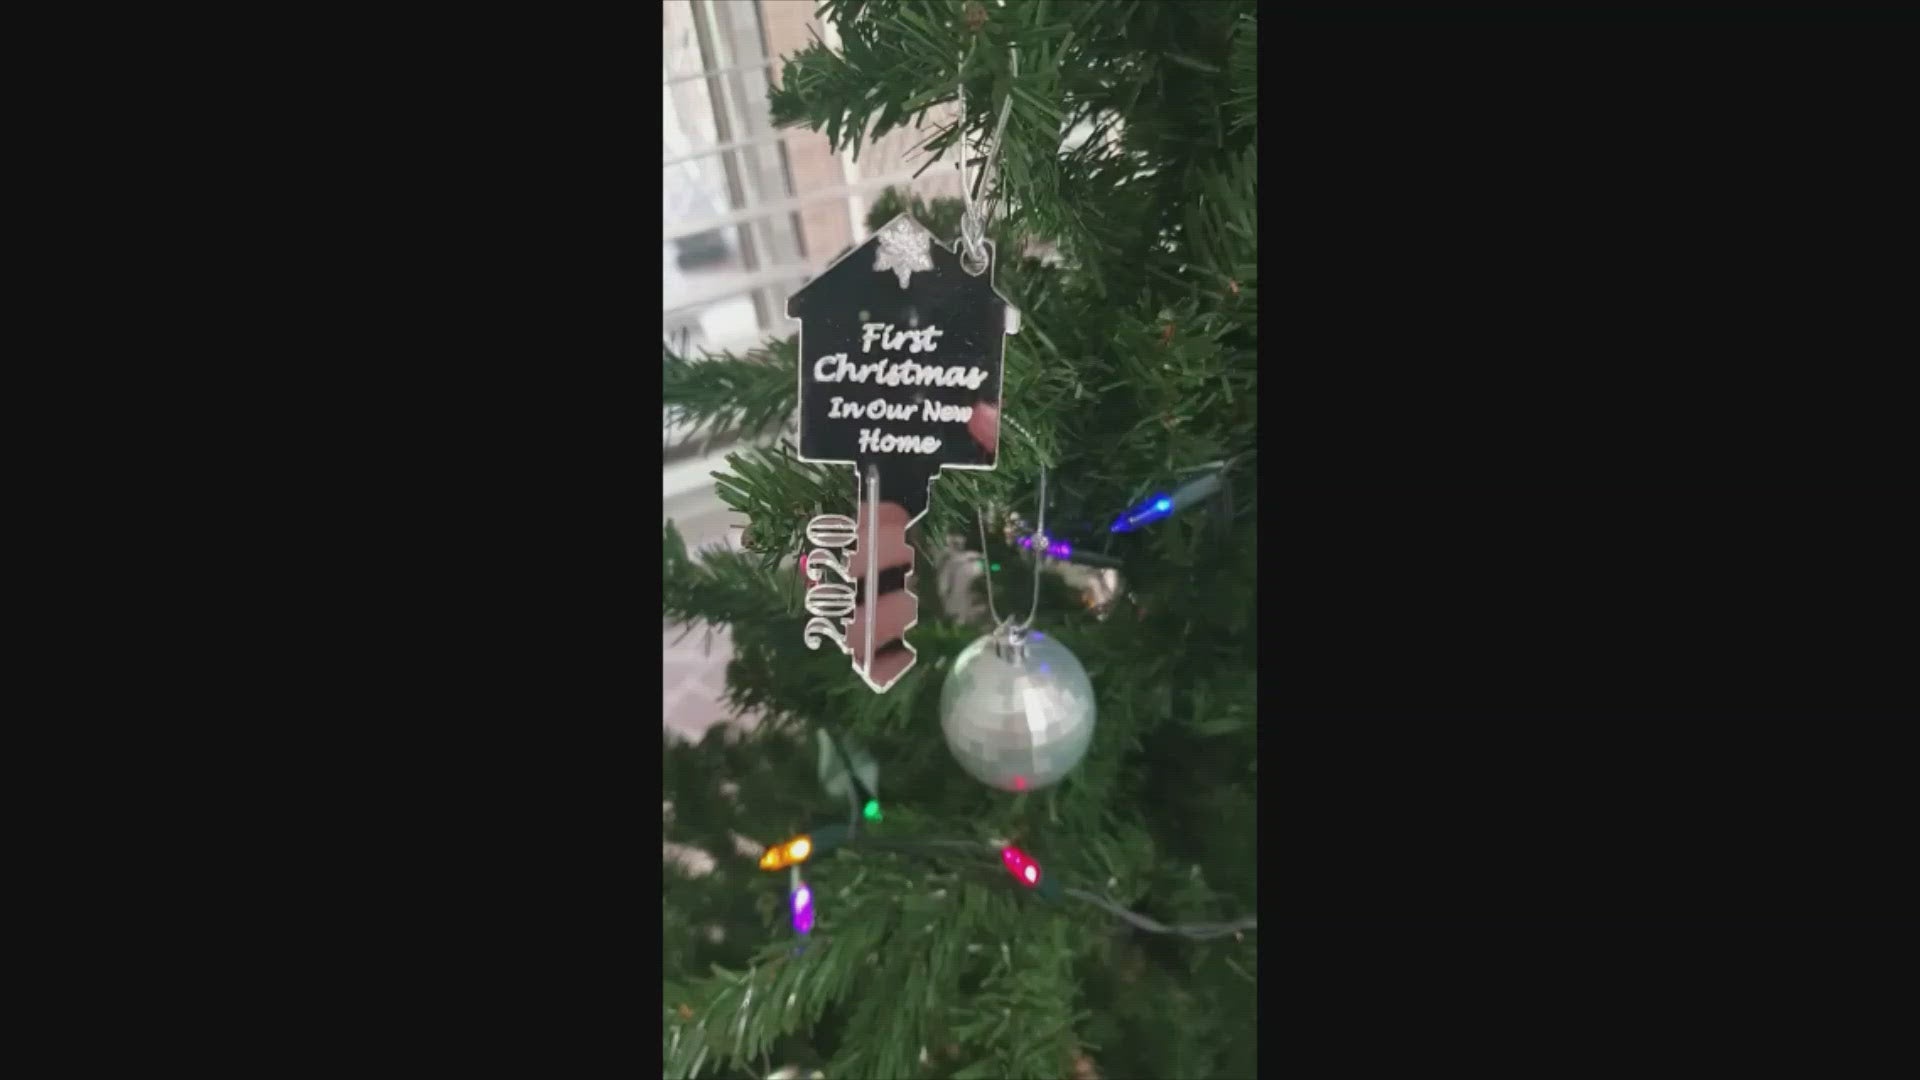 First Christmas in our new home (2019, 2020, 2021, 2022, 2023, 2024) + Names Key Ornament